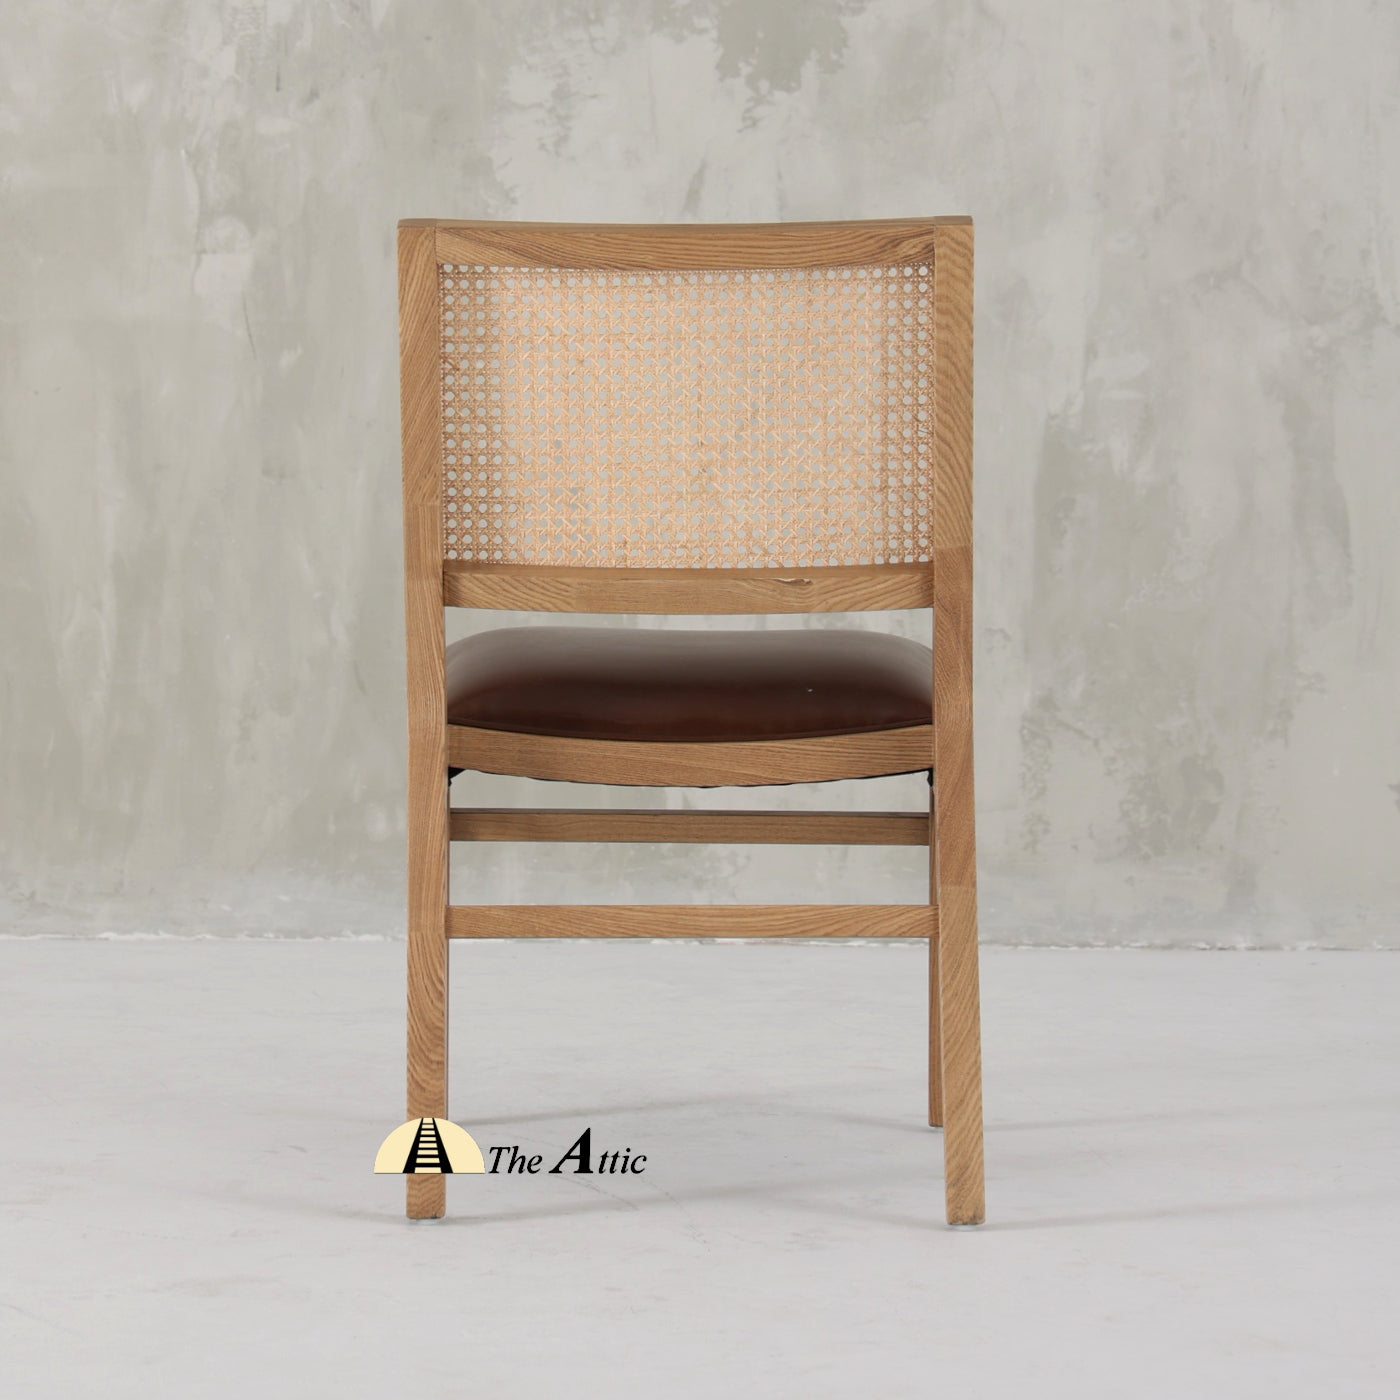 Zurich Oak Wood, Leather and Rattan Dining Chair - The Attic Dubai